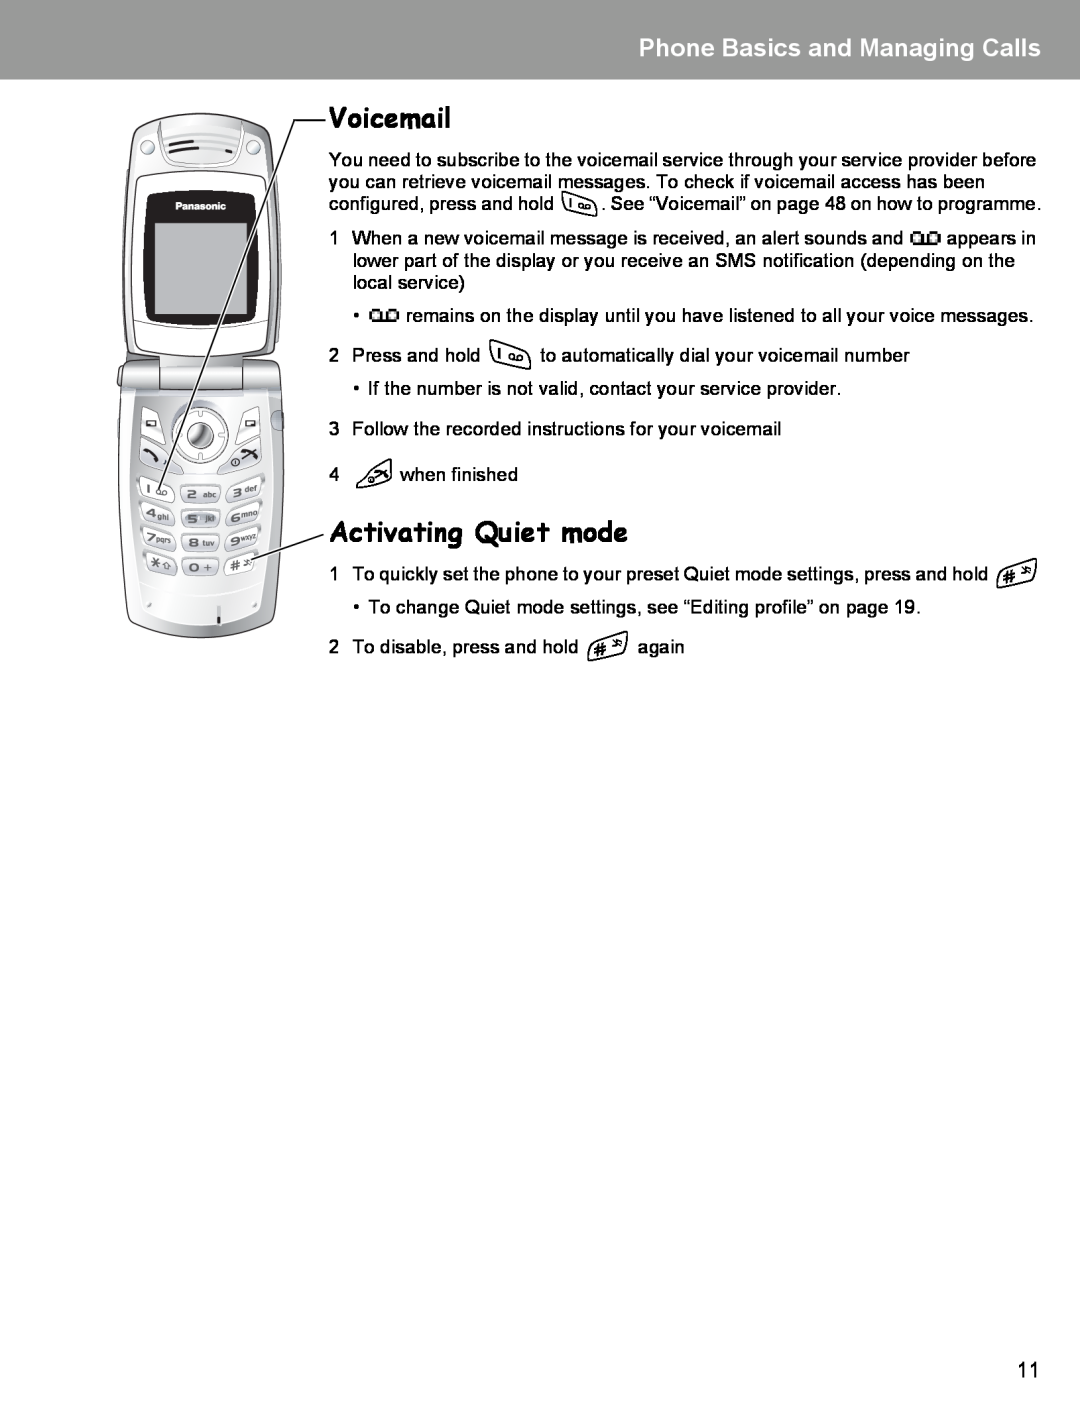 Panasonic EB-X400 operating instructions Voicemail, Activating Quiet mode, Phone Basics and Managing Calls 